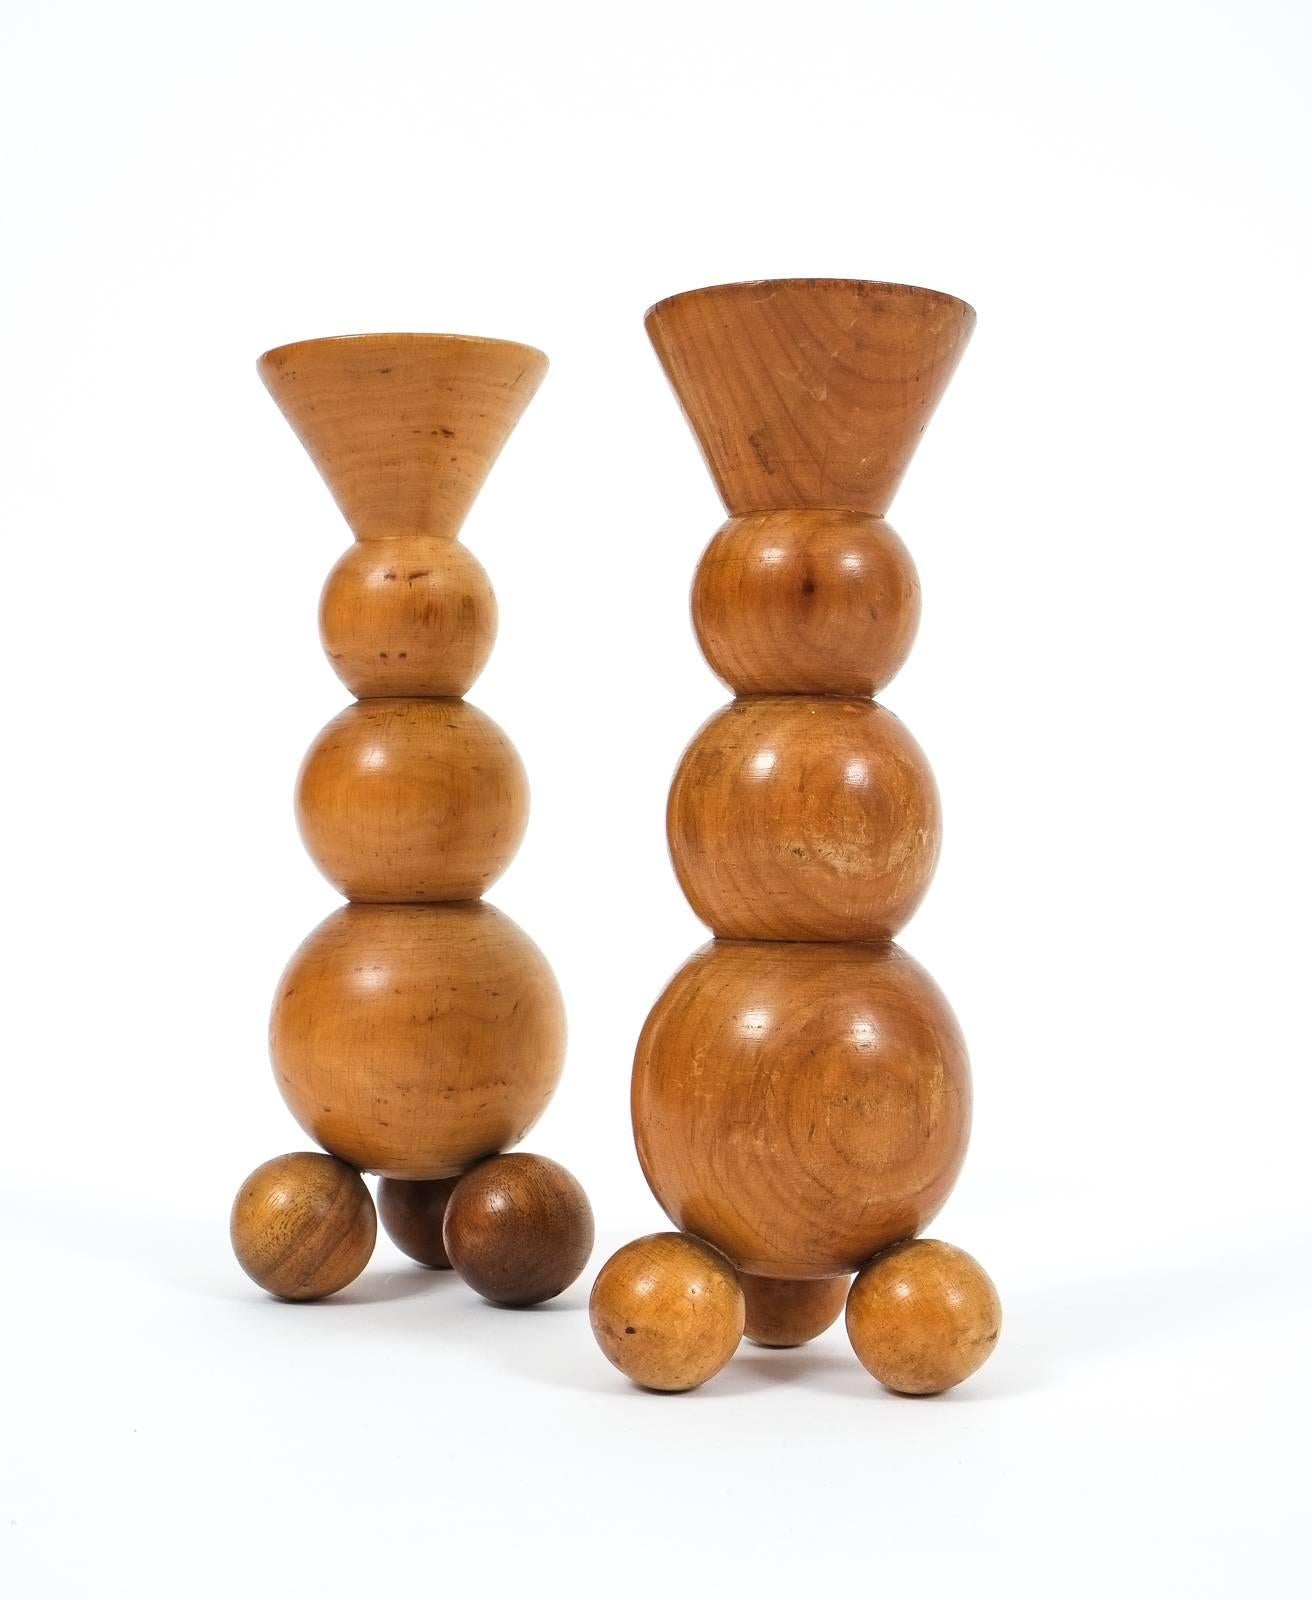 Pair of Art Deco Candlesticks Made from Wood (Art déco)